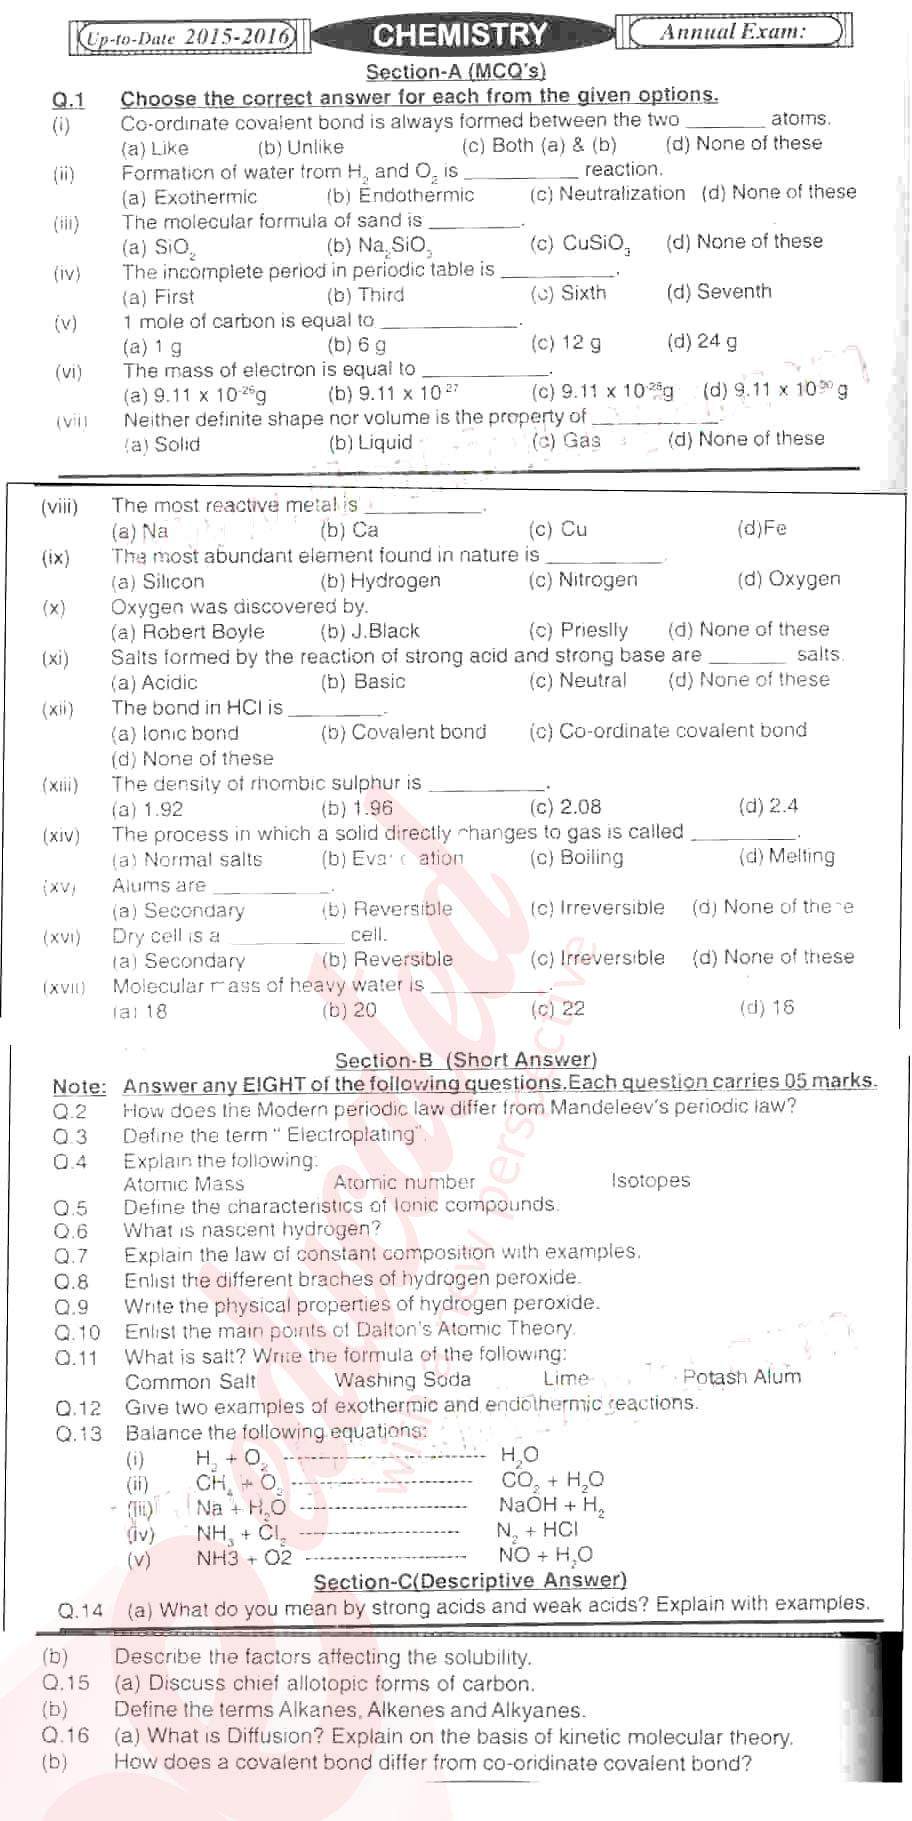 Chemistry 9th English Medium Past Paper Group 1 BISE Hyderabad 2015